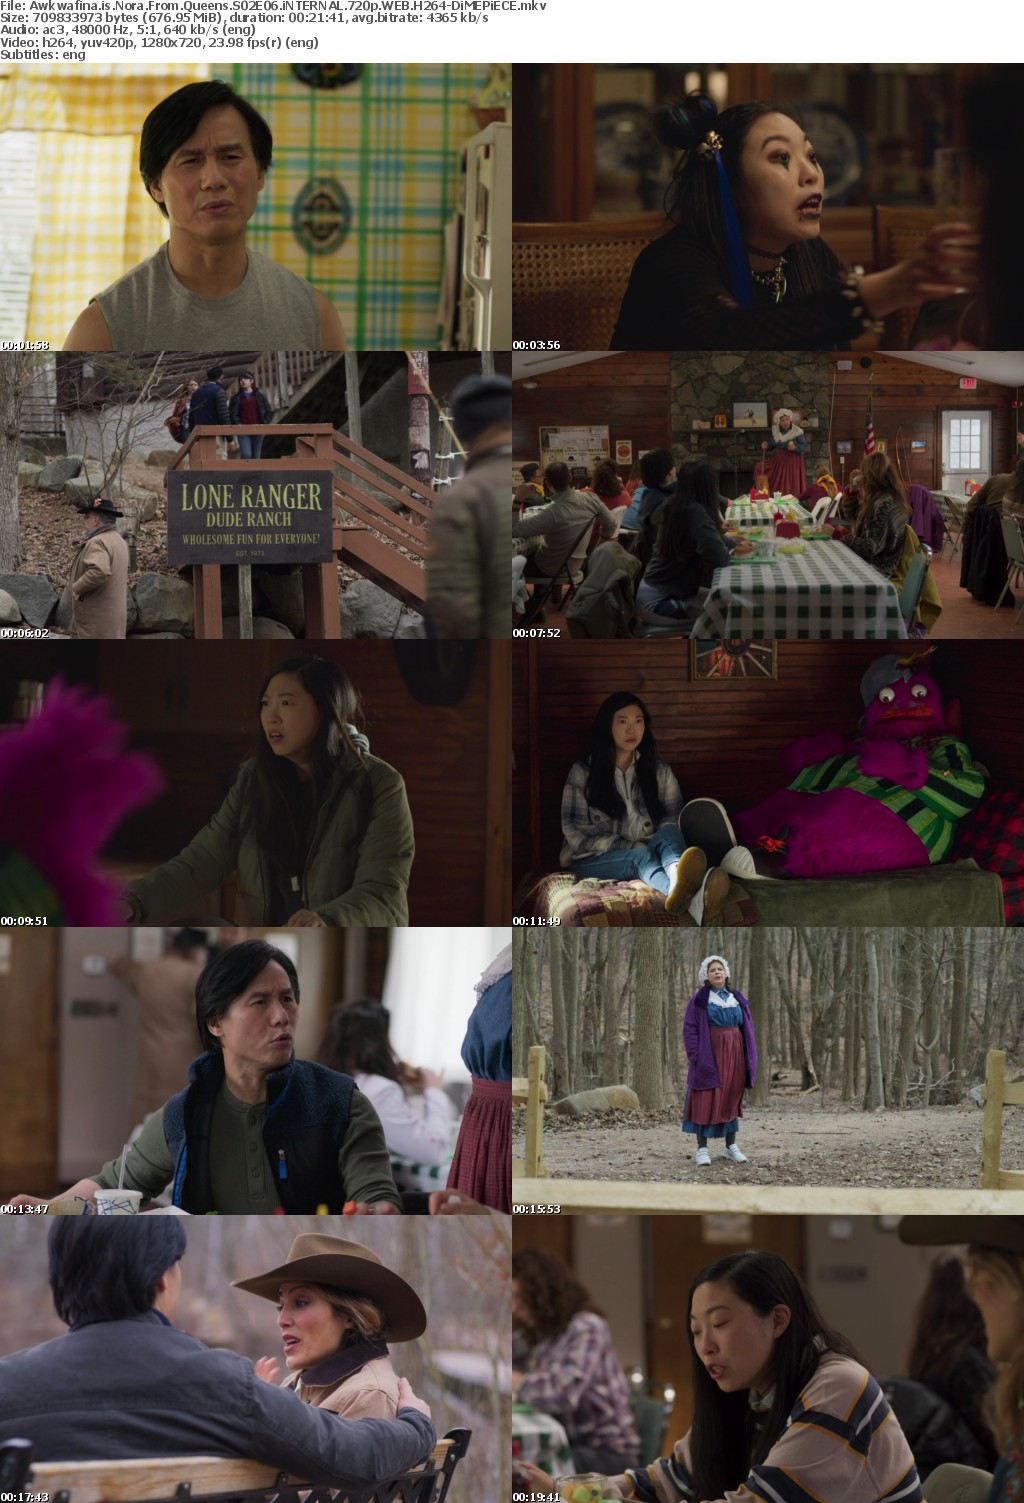 Awkwafina is Nora From Queens S02E06 iNTERNAL 720p WEB H264-DiMEPiECE